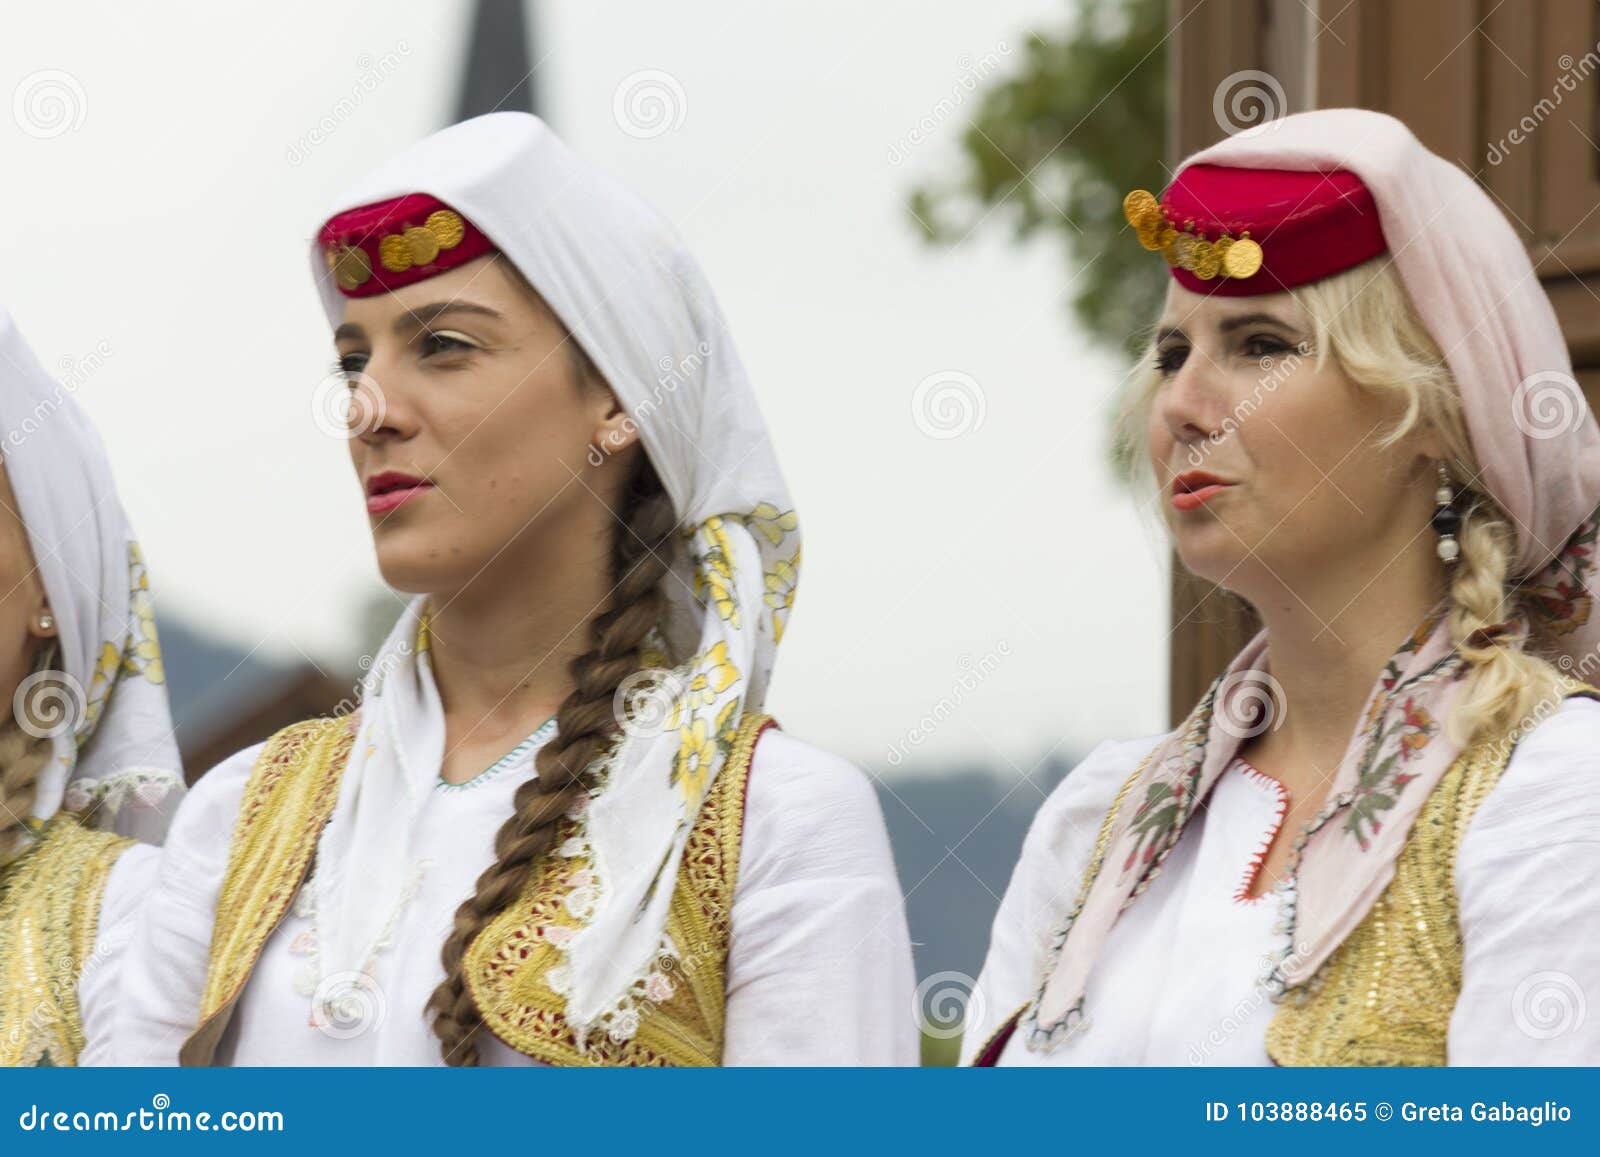 Two Bosnian Girls Traditionally Dressed in Sarajevo Editorial Image ...